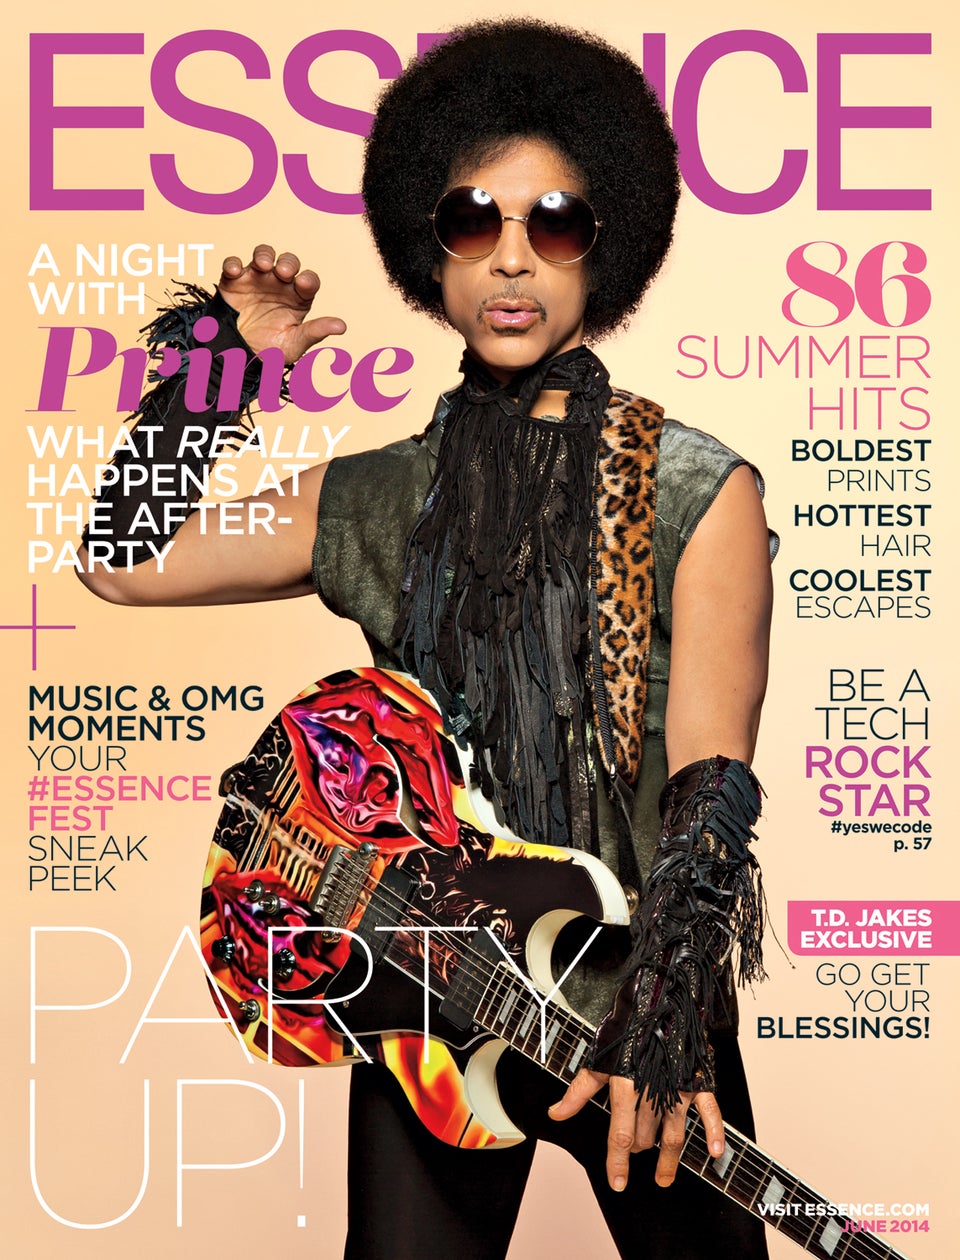 Prince Rocks the Cover of ESSENCE’s June Issue